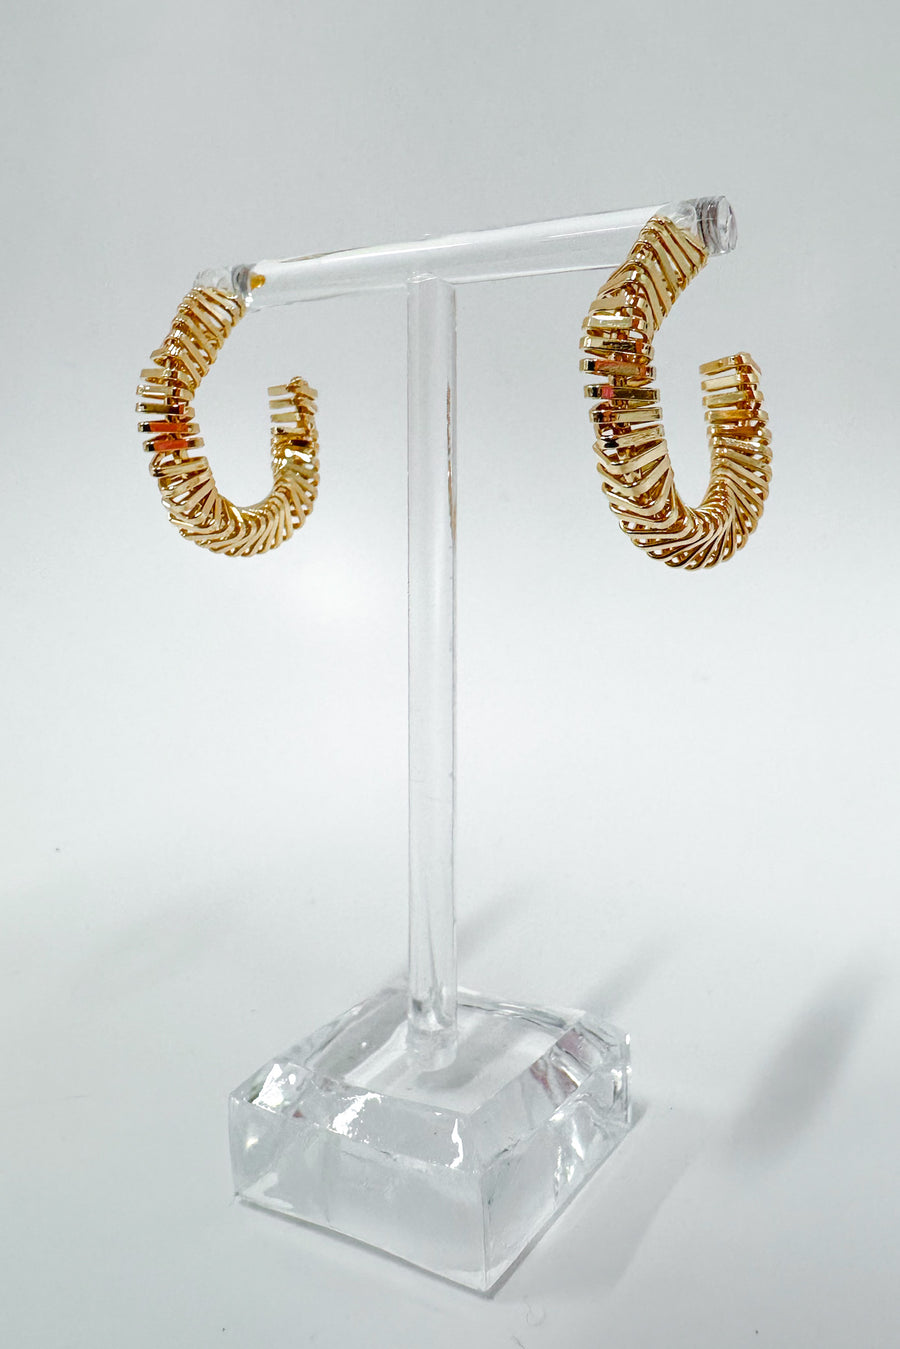  Immaculate Taste Twist Spiral Hoop Earrings - Madison and Mallory